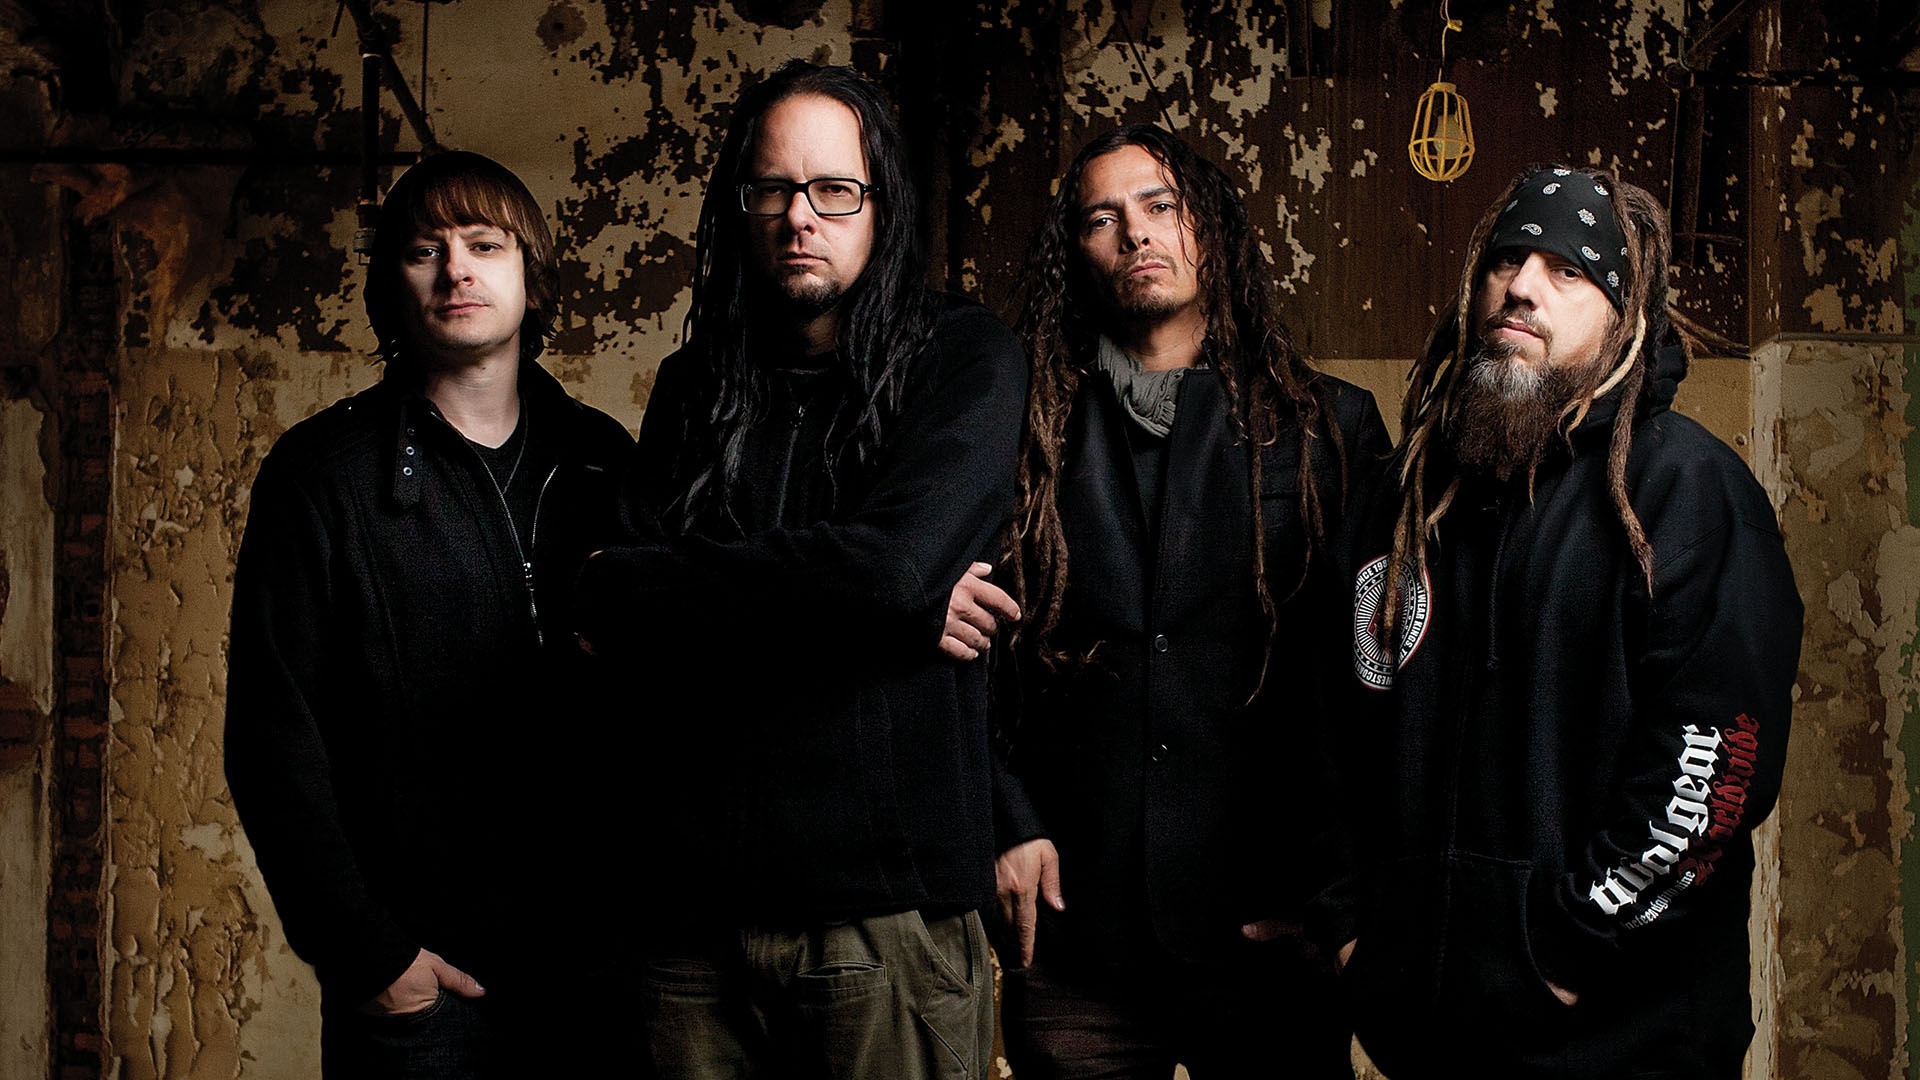 Korn wallpapers, High-quality images, Pictures, Backgrounds, 1920x1080 Full HD Desktop